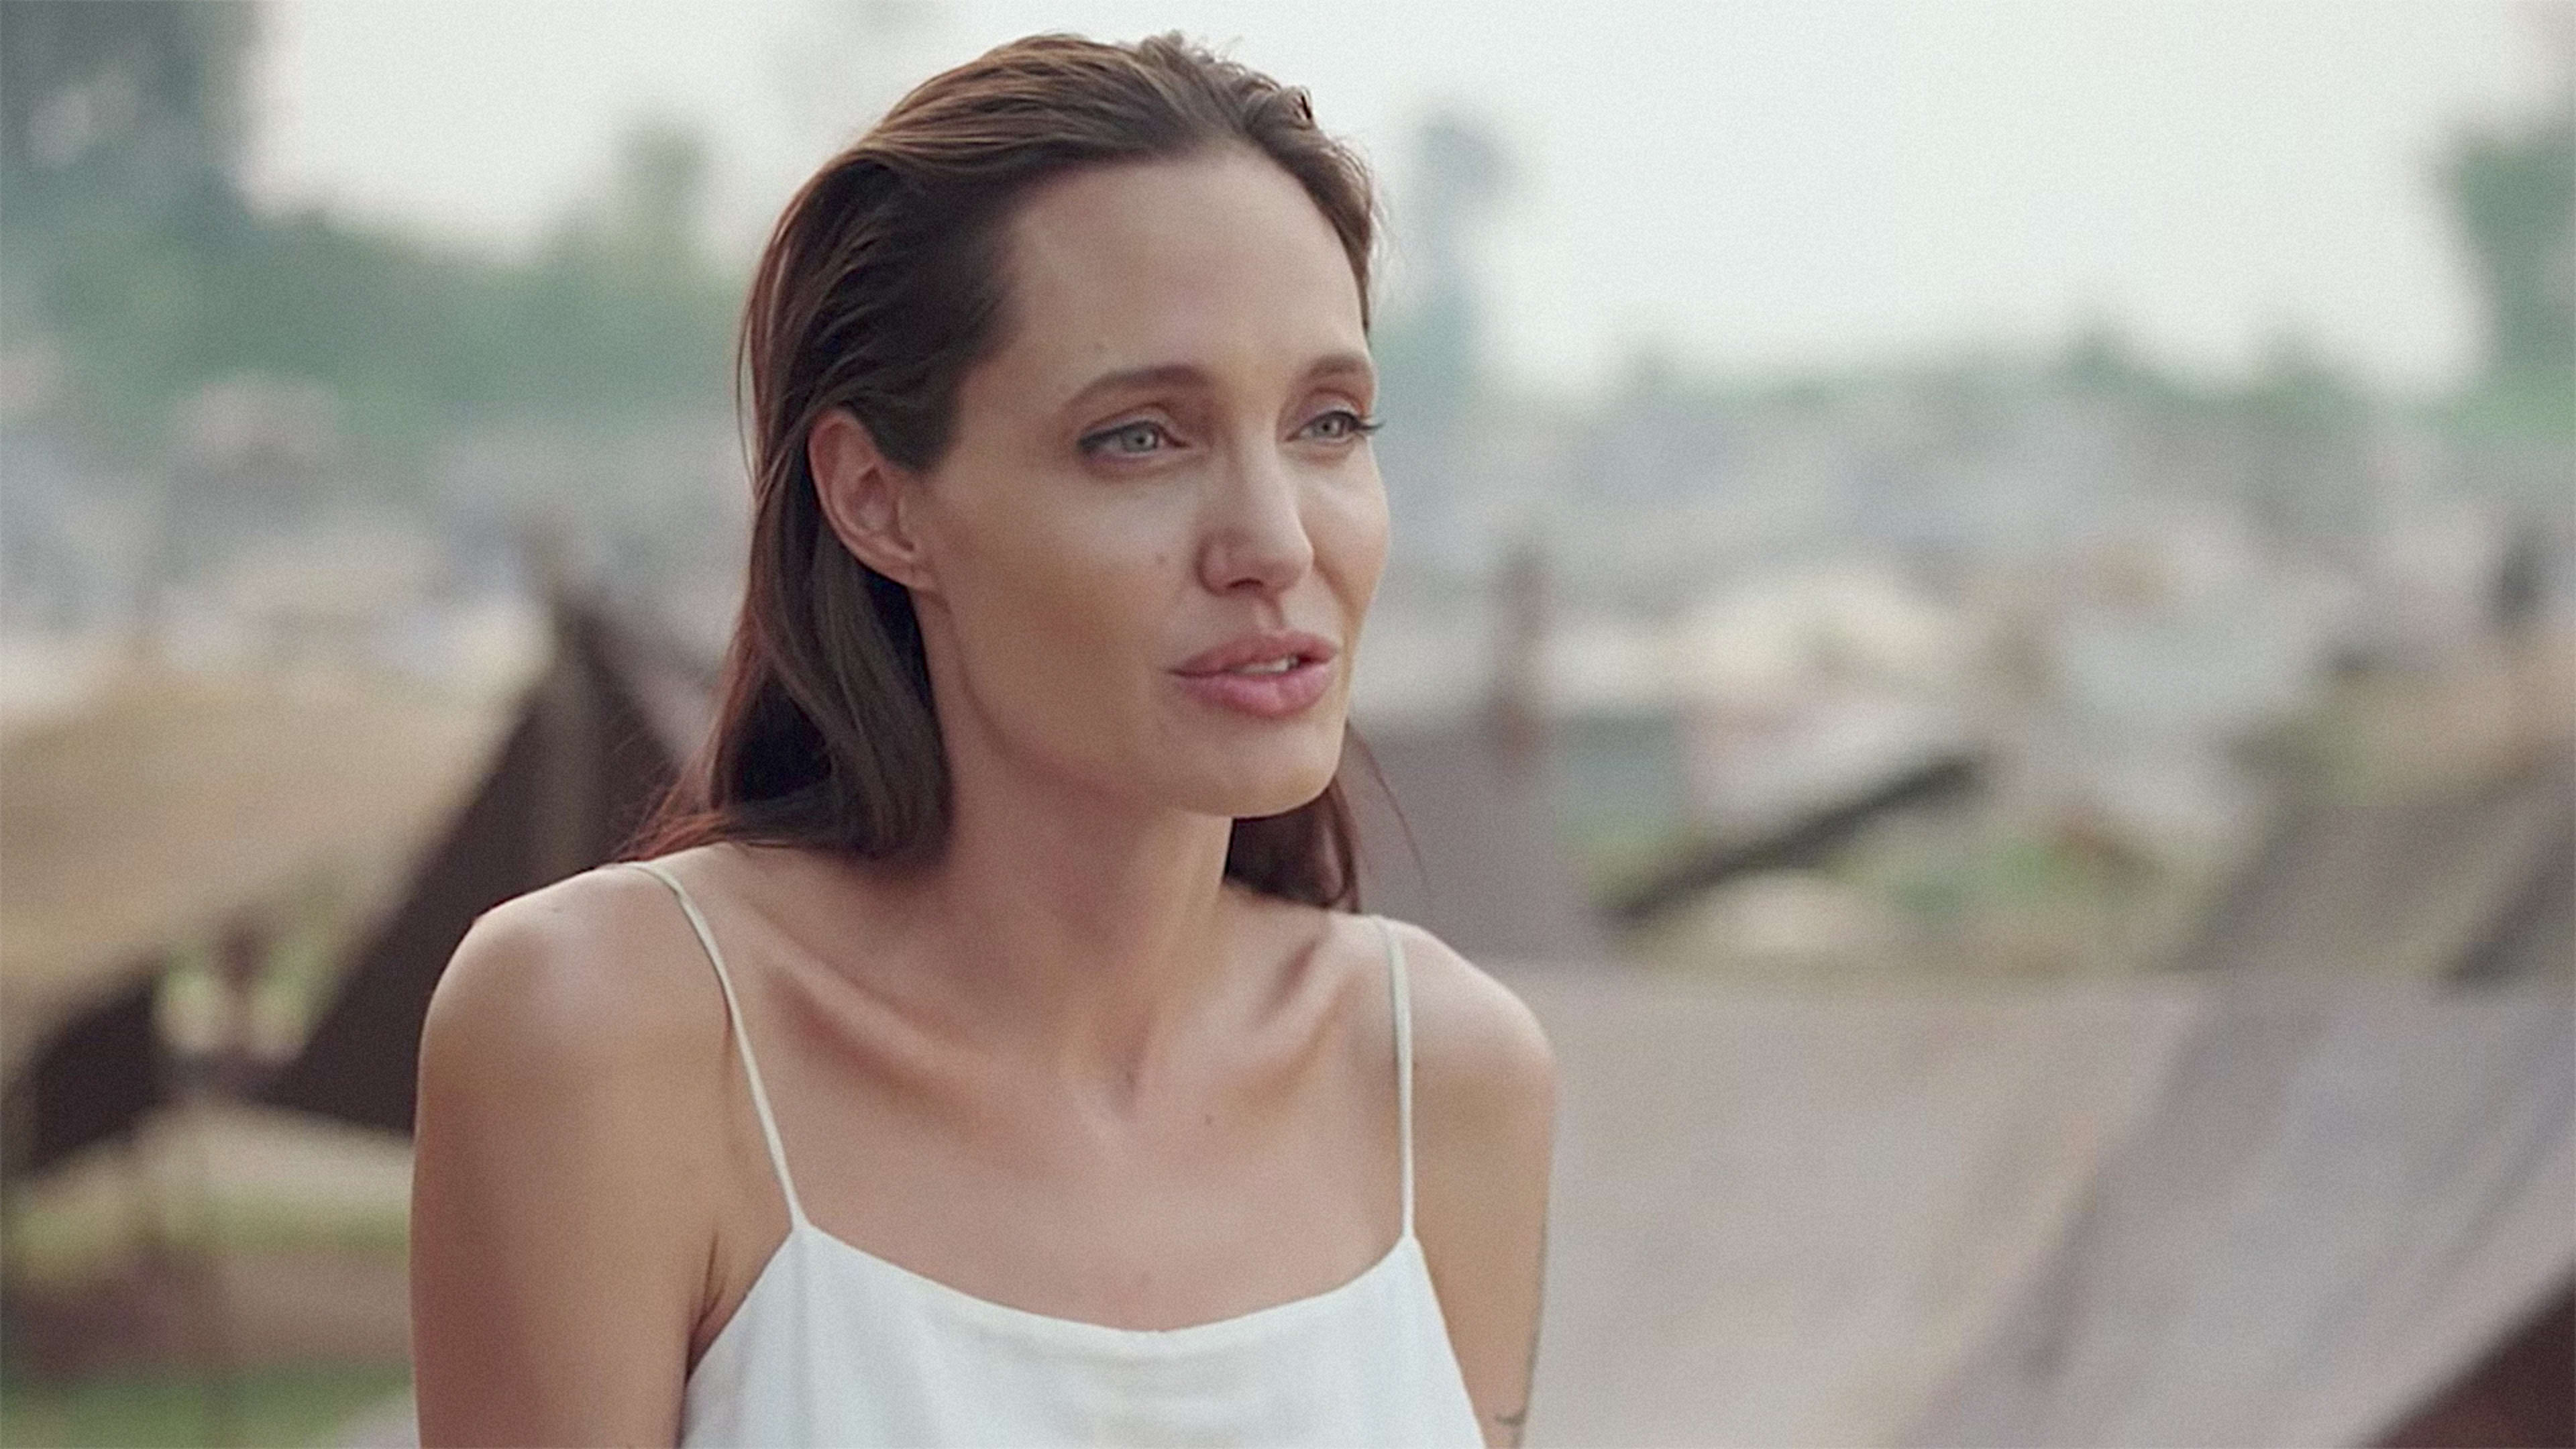 UPDATE: Angelina Jolie’s Casting Strategy Is Either Meaningful Or Exploitative